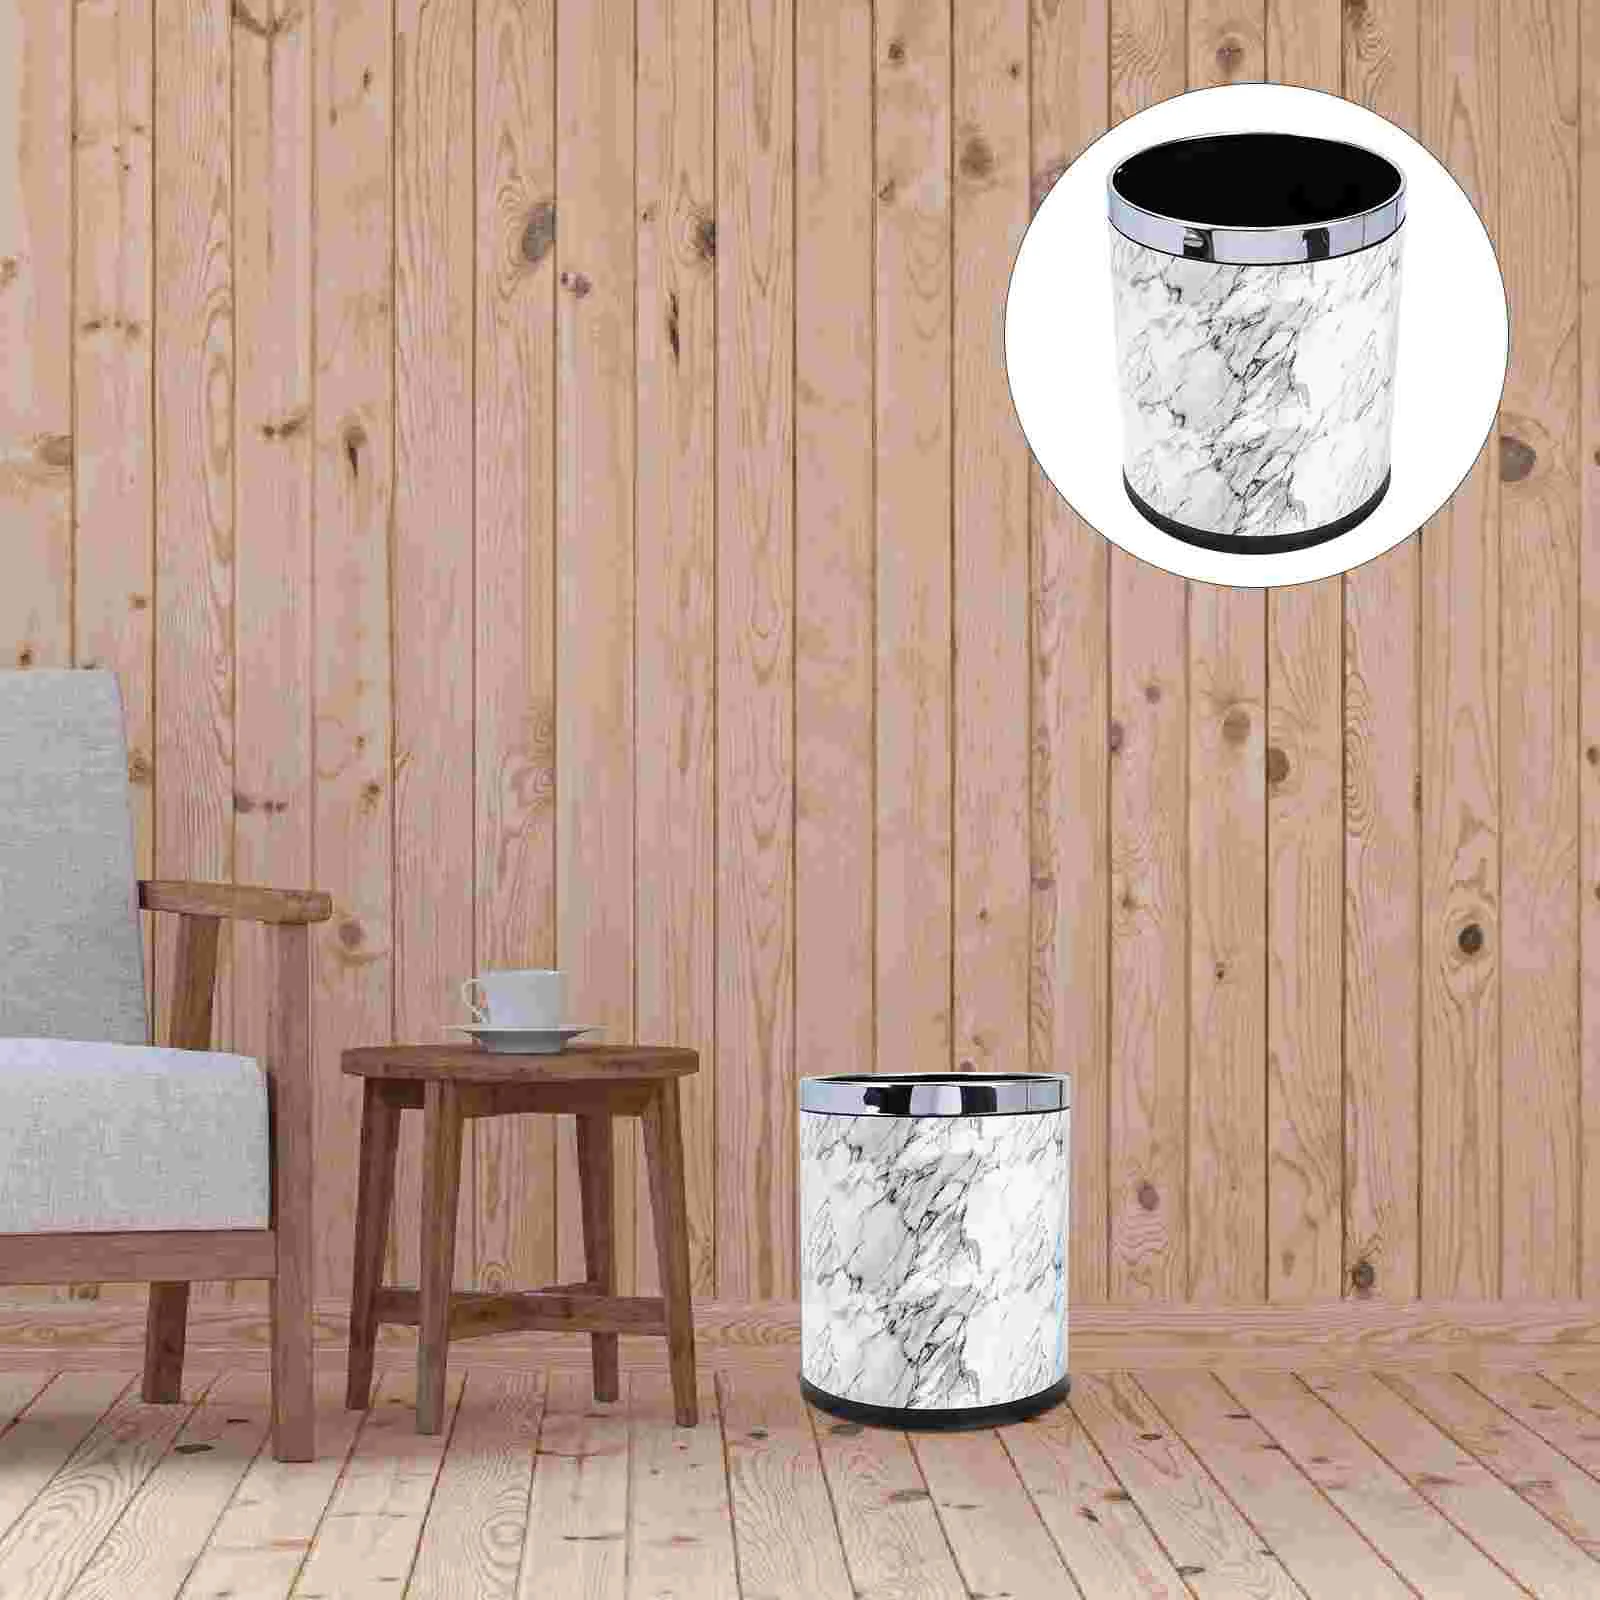 

Trash Can Bin Garbage Waste Kitchen Container Basket Bathroom Deskplastic Containers Rubbish Cans Office Bedroom Wastebasket